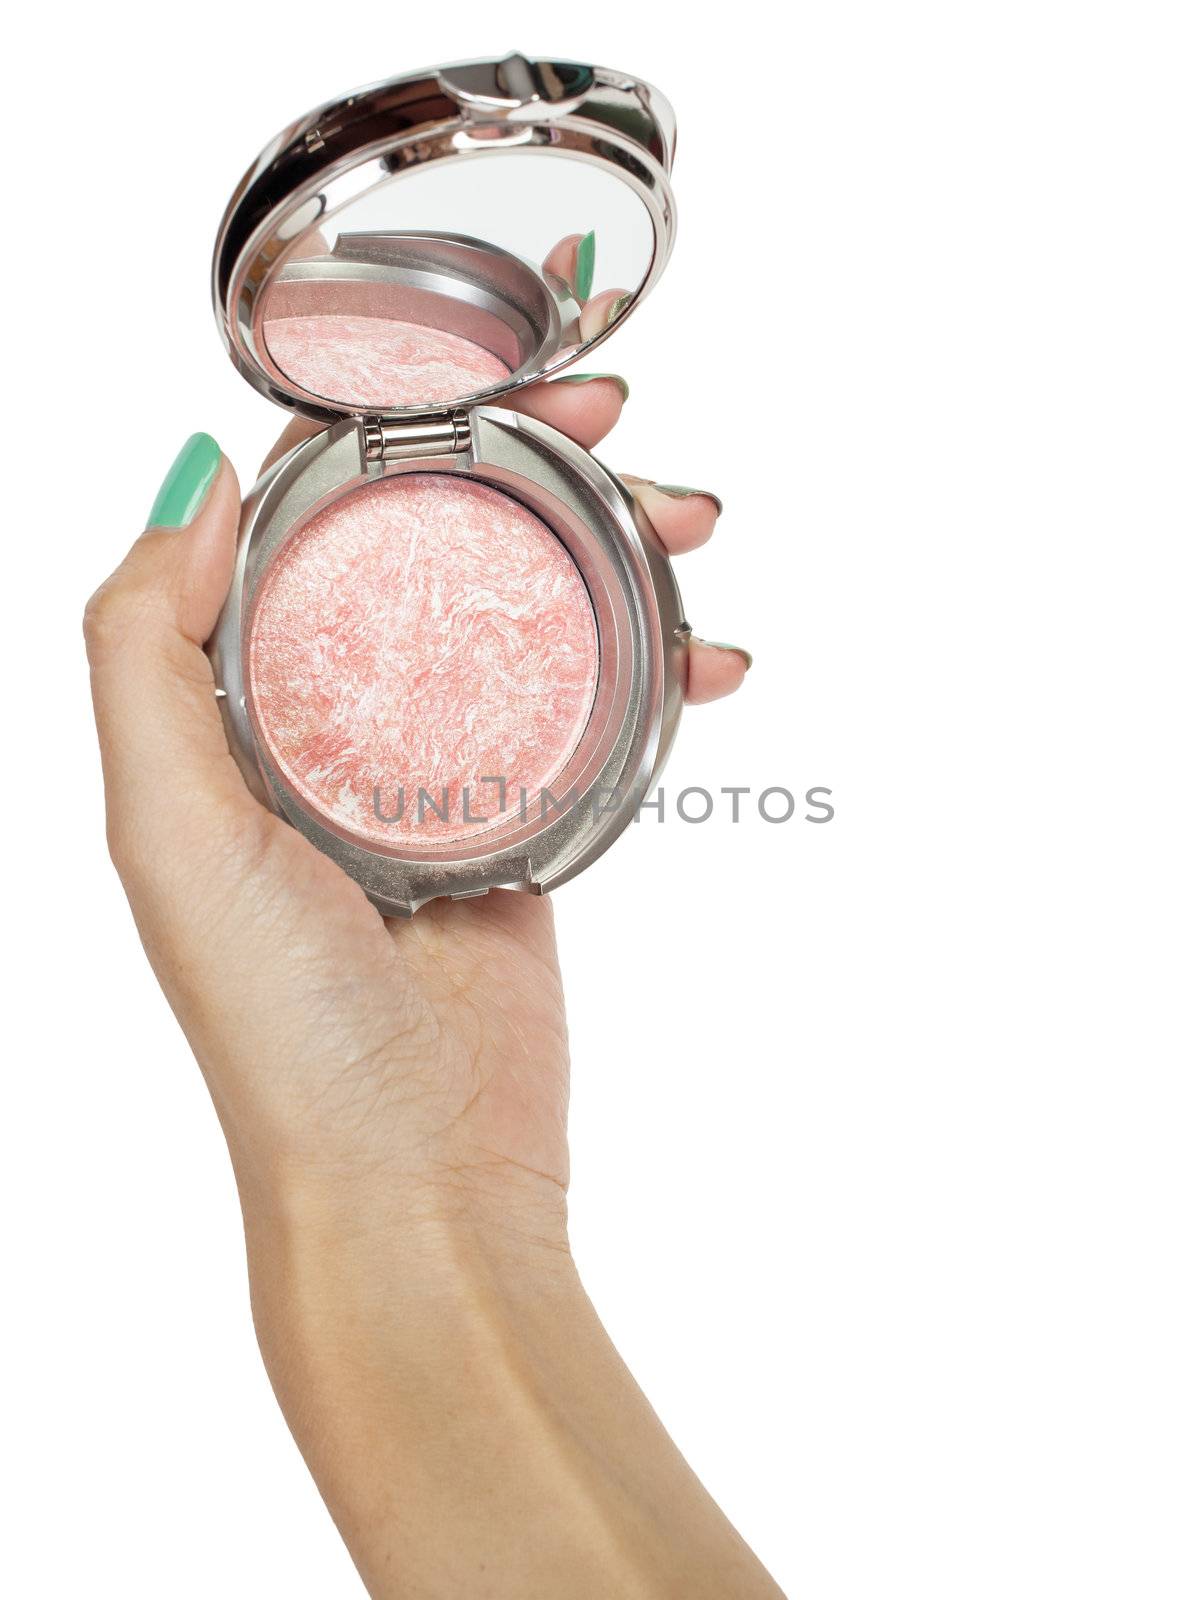 Cosmetic powder and hand